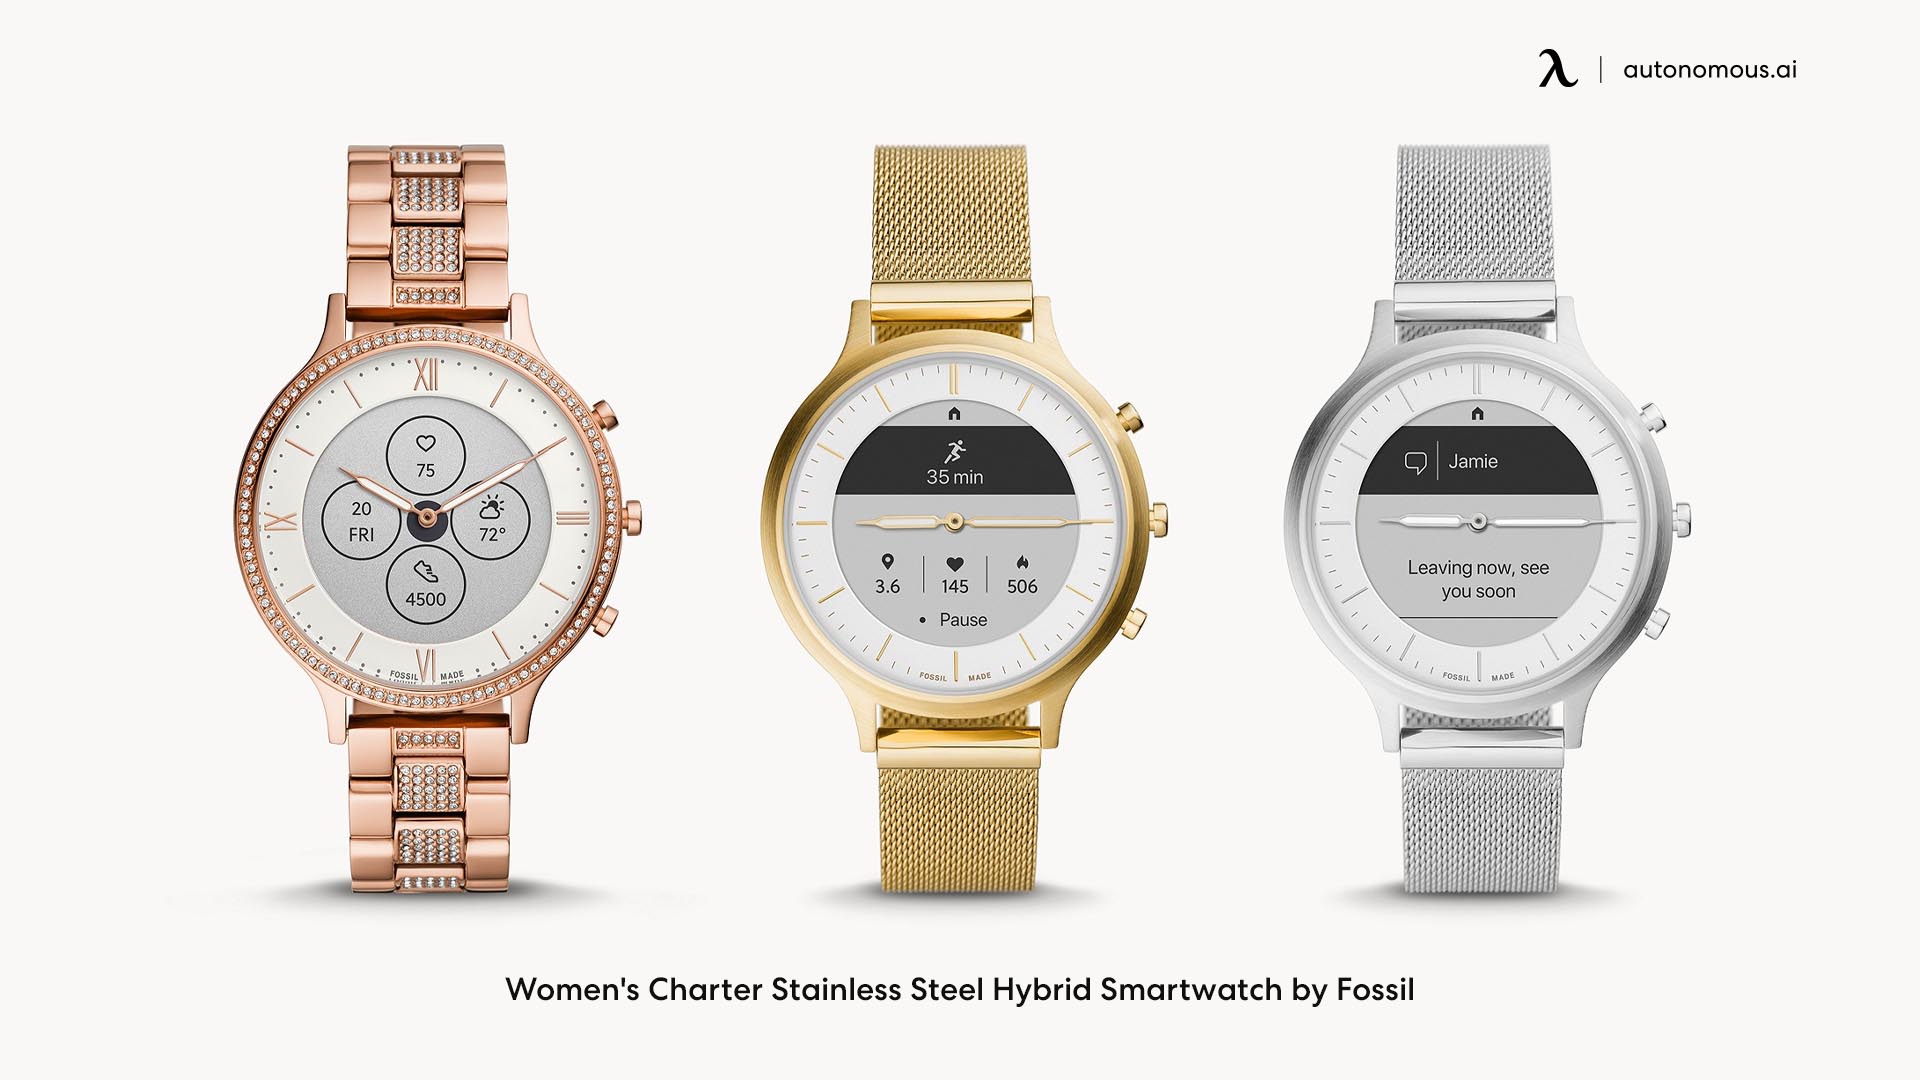 Women's Charter Stainless Steel Hybrid Smartwatch by Fossil